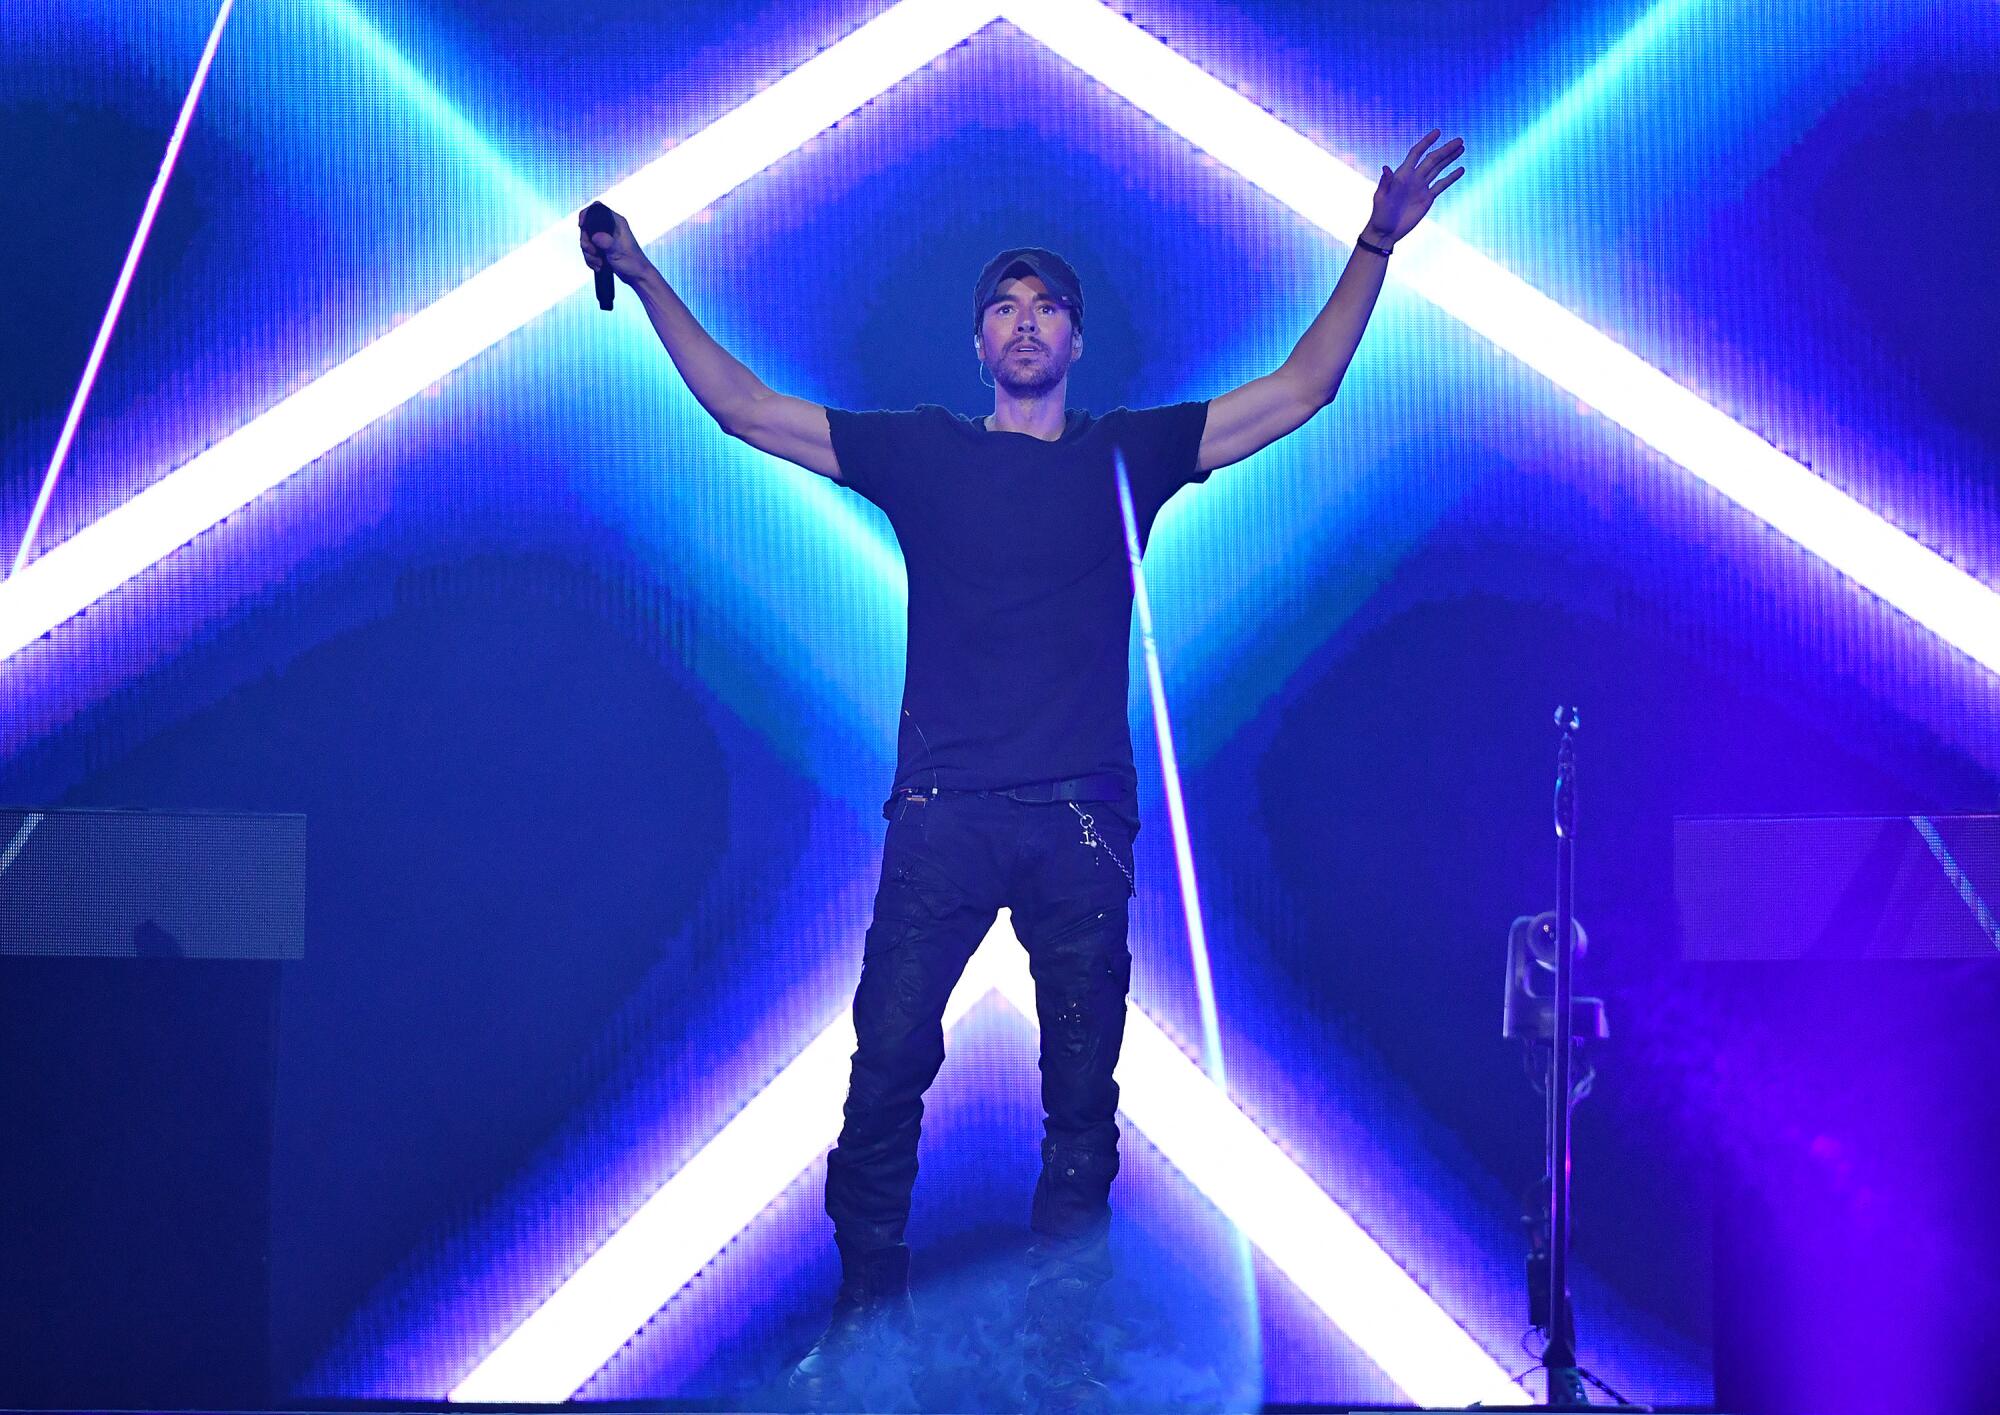 A man holds out his arms in front of shafts of light on stage.